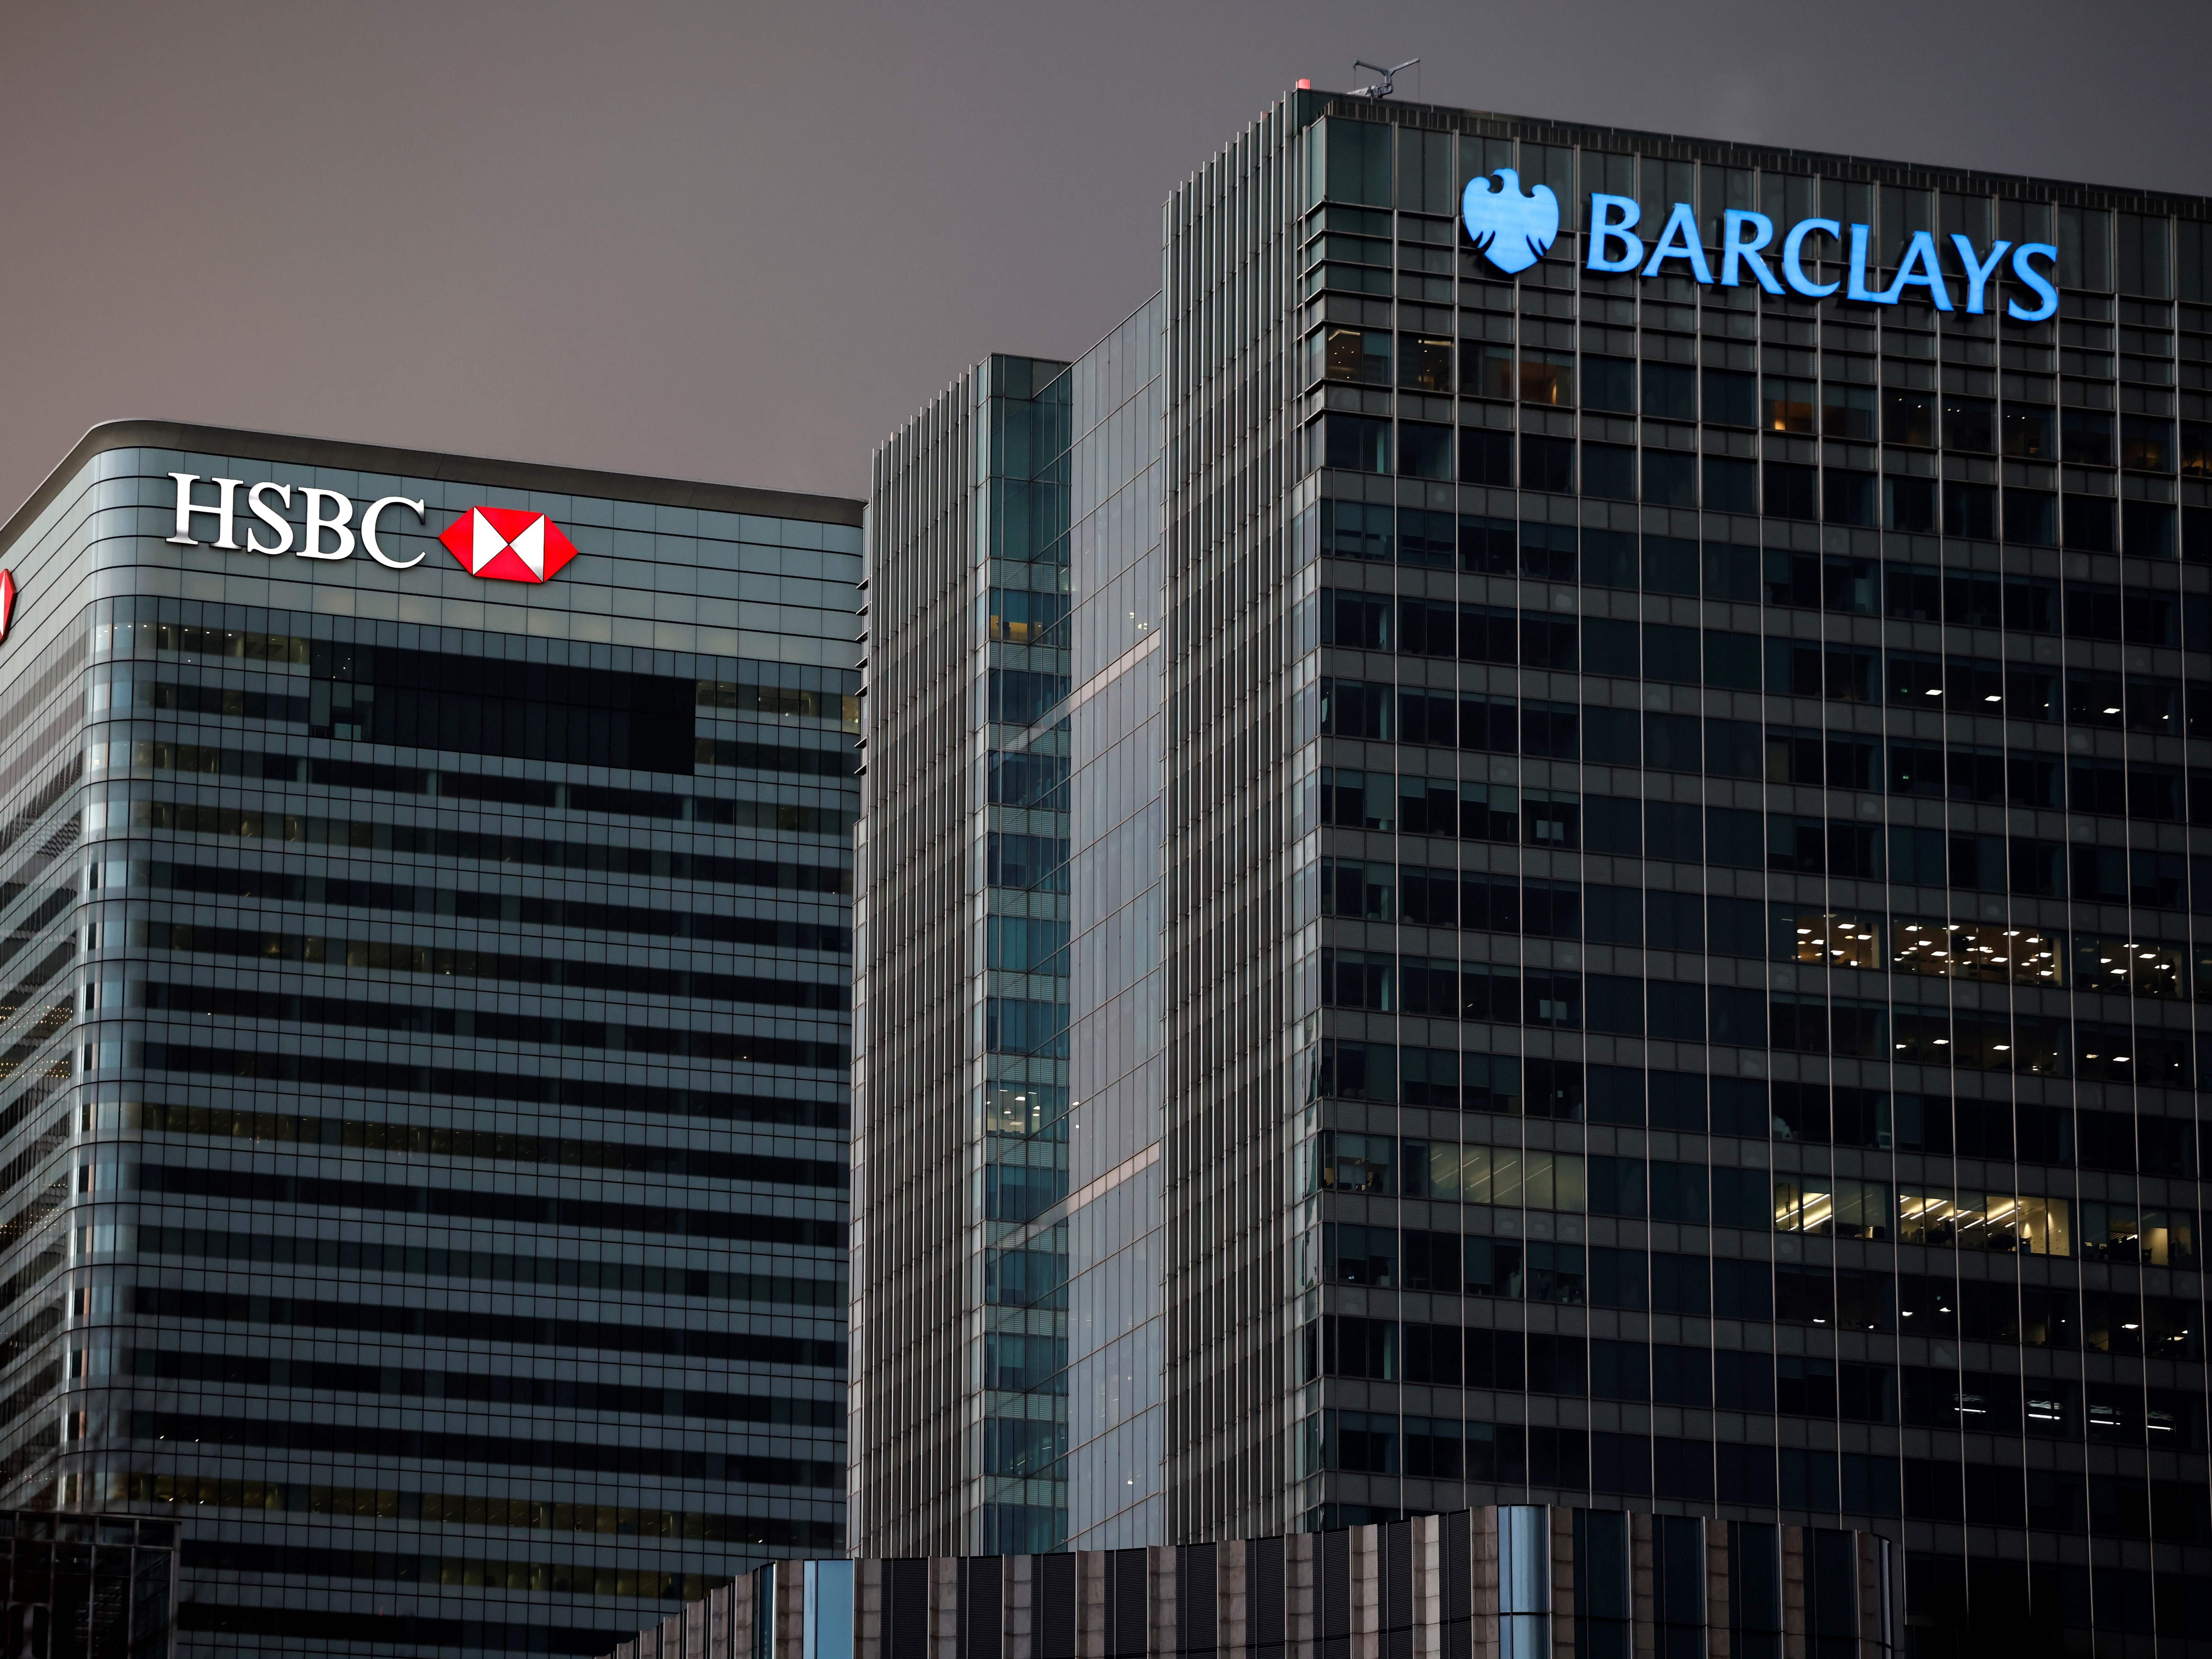 HSBC and Barclays were among top European banks who have given the most to companies involved in expanding fossil fuel production since 2016 in the report